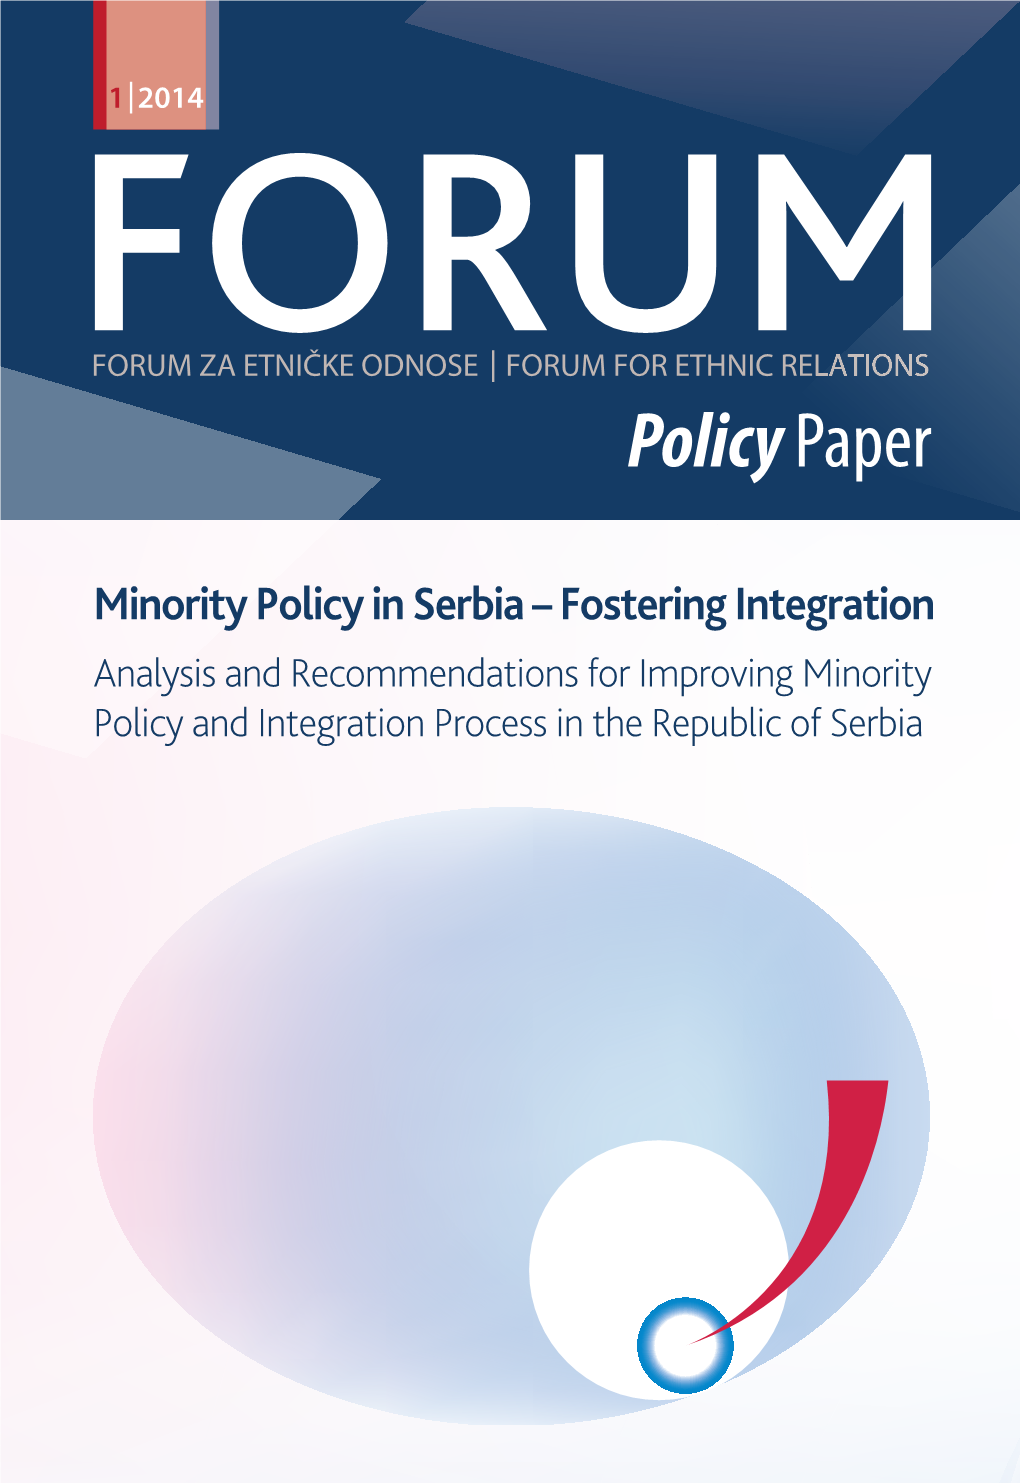 Minority Policy in Serbia – Fostering Integration Analysis and Recommendations for Improving Minority Policy and Integration Process in the Republic of Serbia